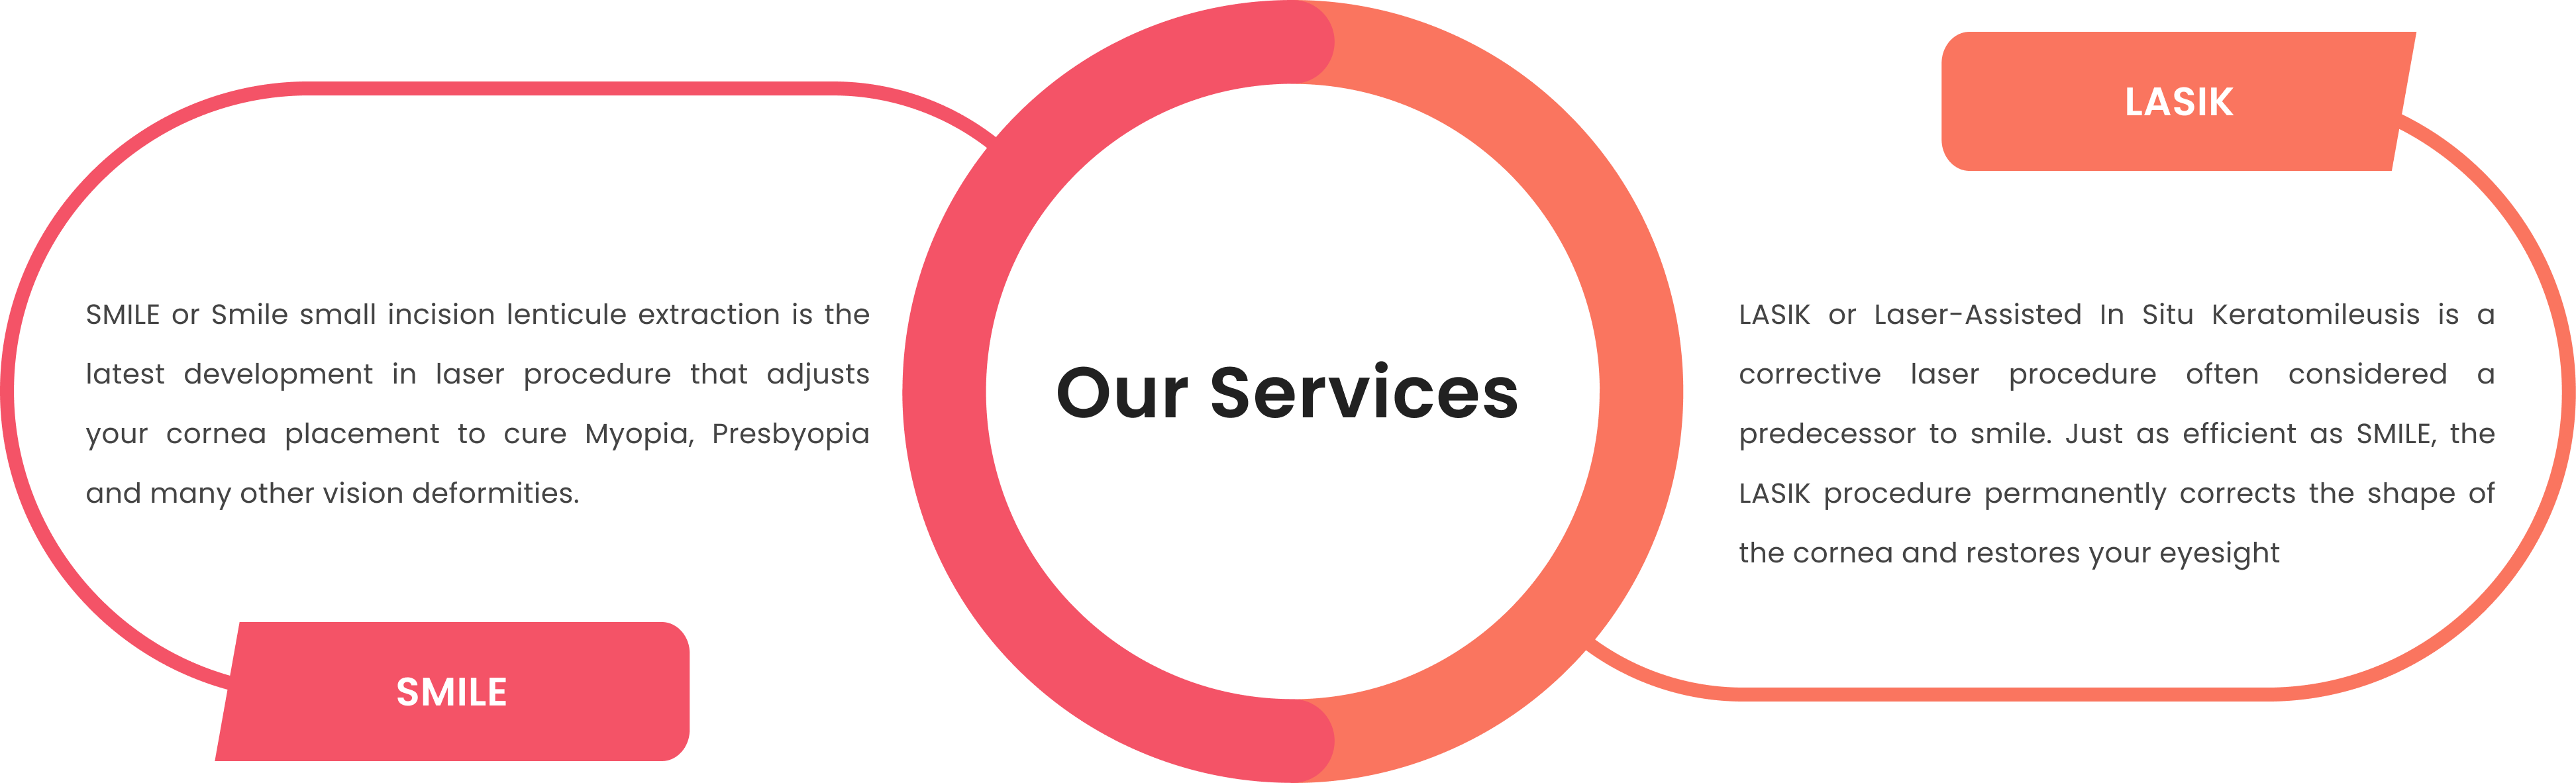 our-services-image